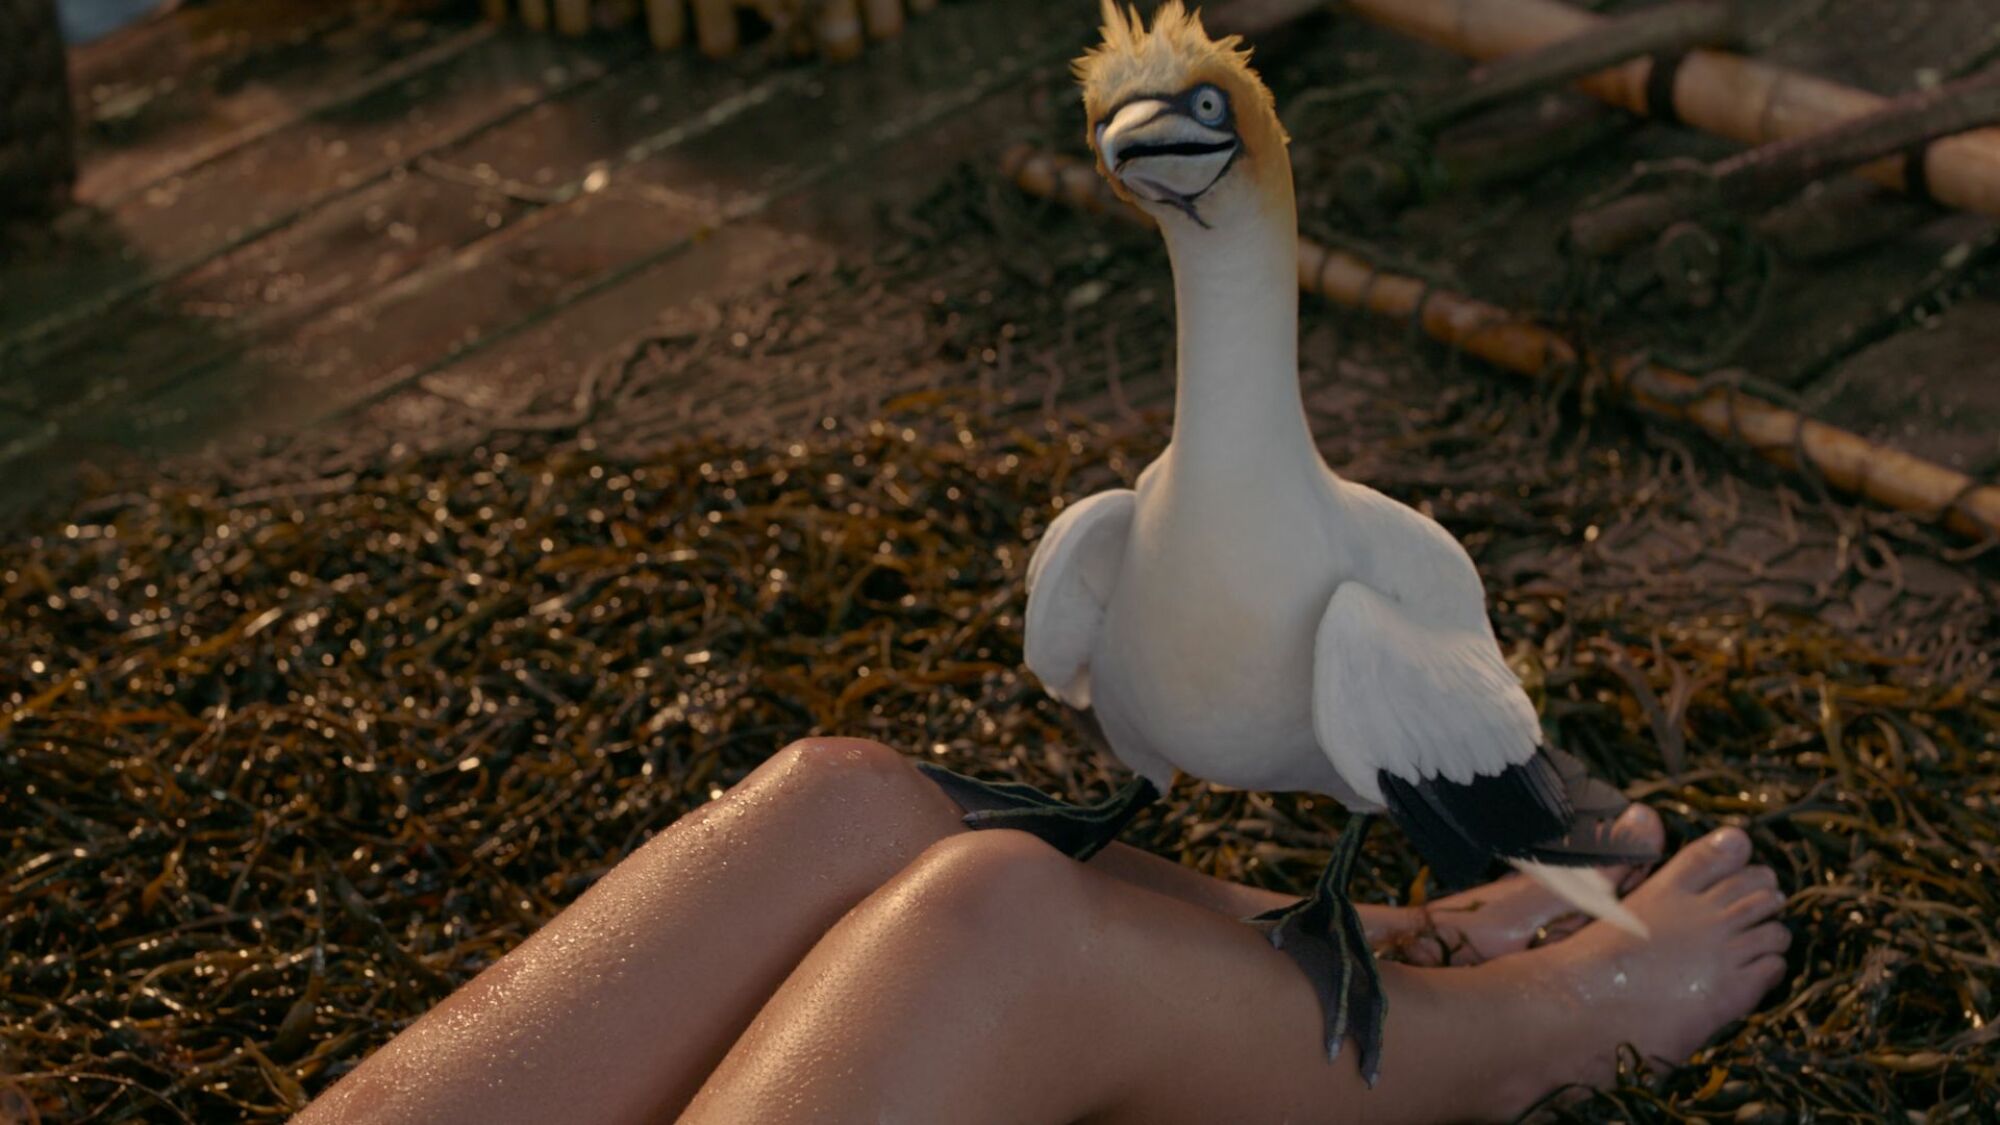 Scuttle, voiced by Awkwafina, sits on Ariel's legs in "The Little Mermaid."